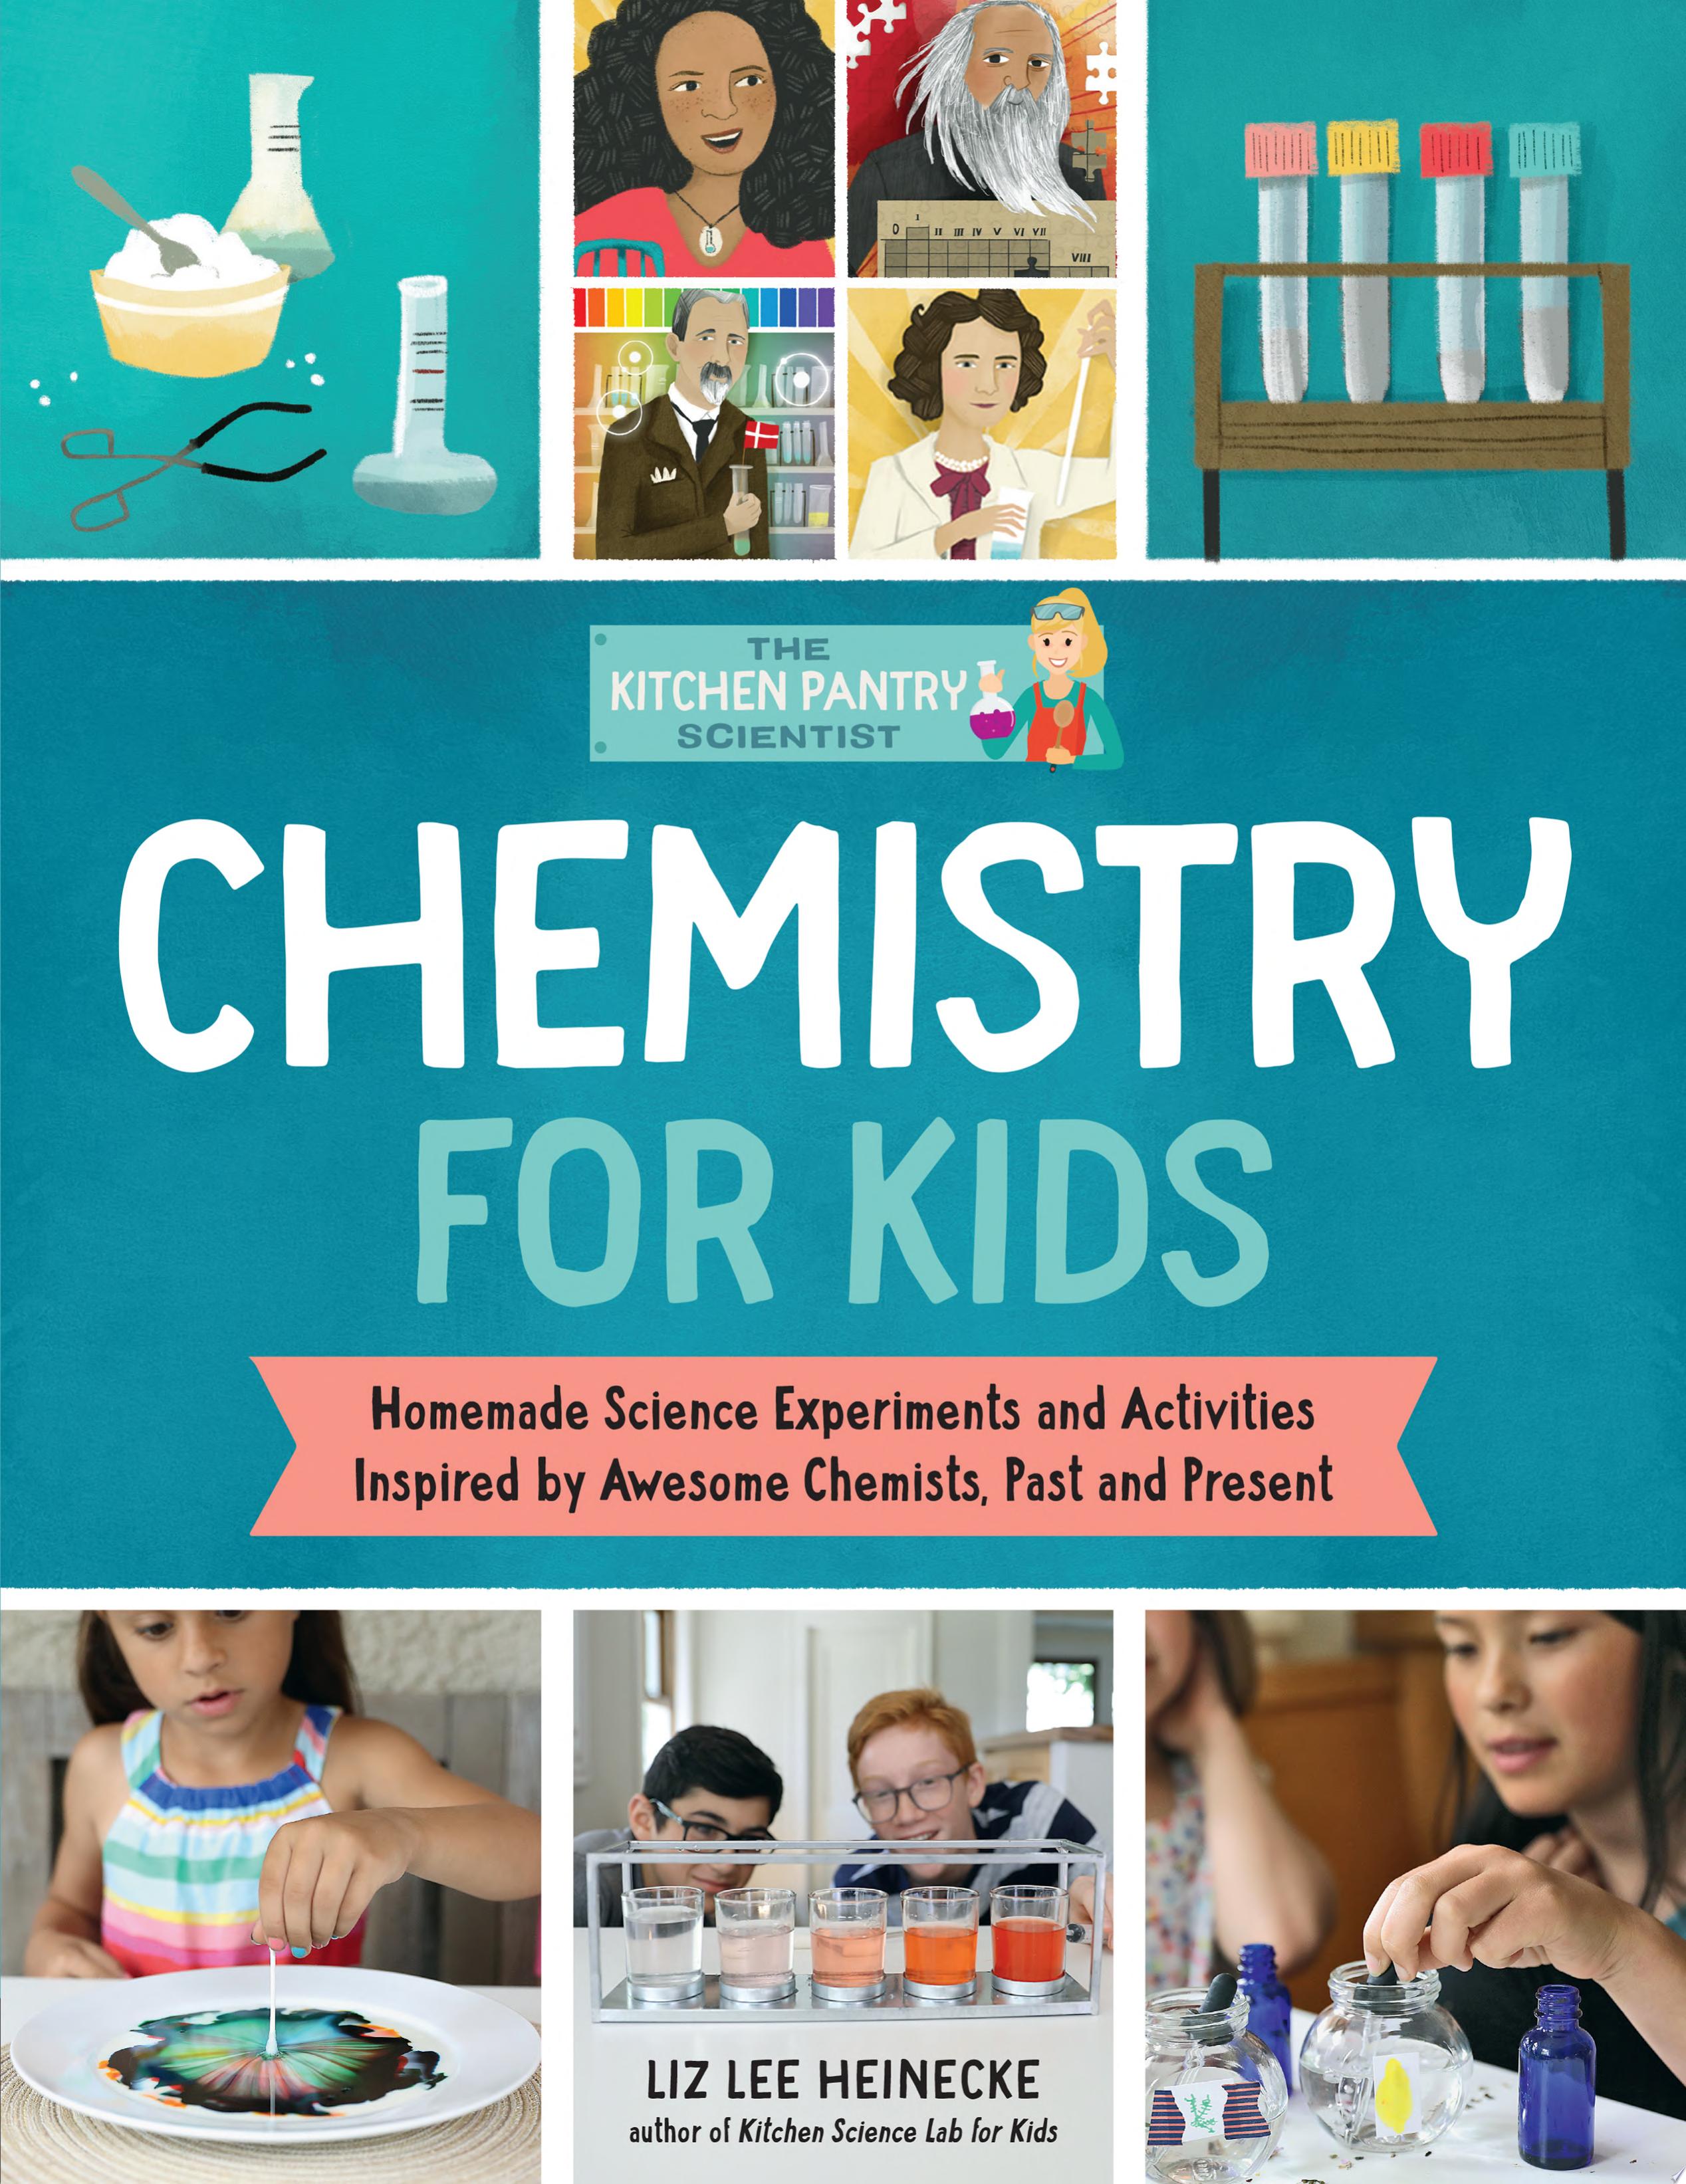 Image for "The Kitchen Pantry Scientist: Chemistry for Kids"